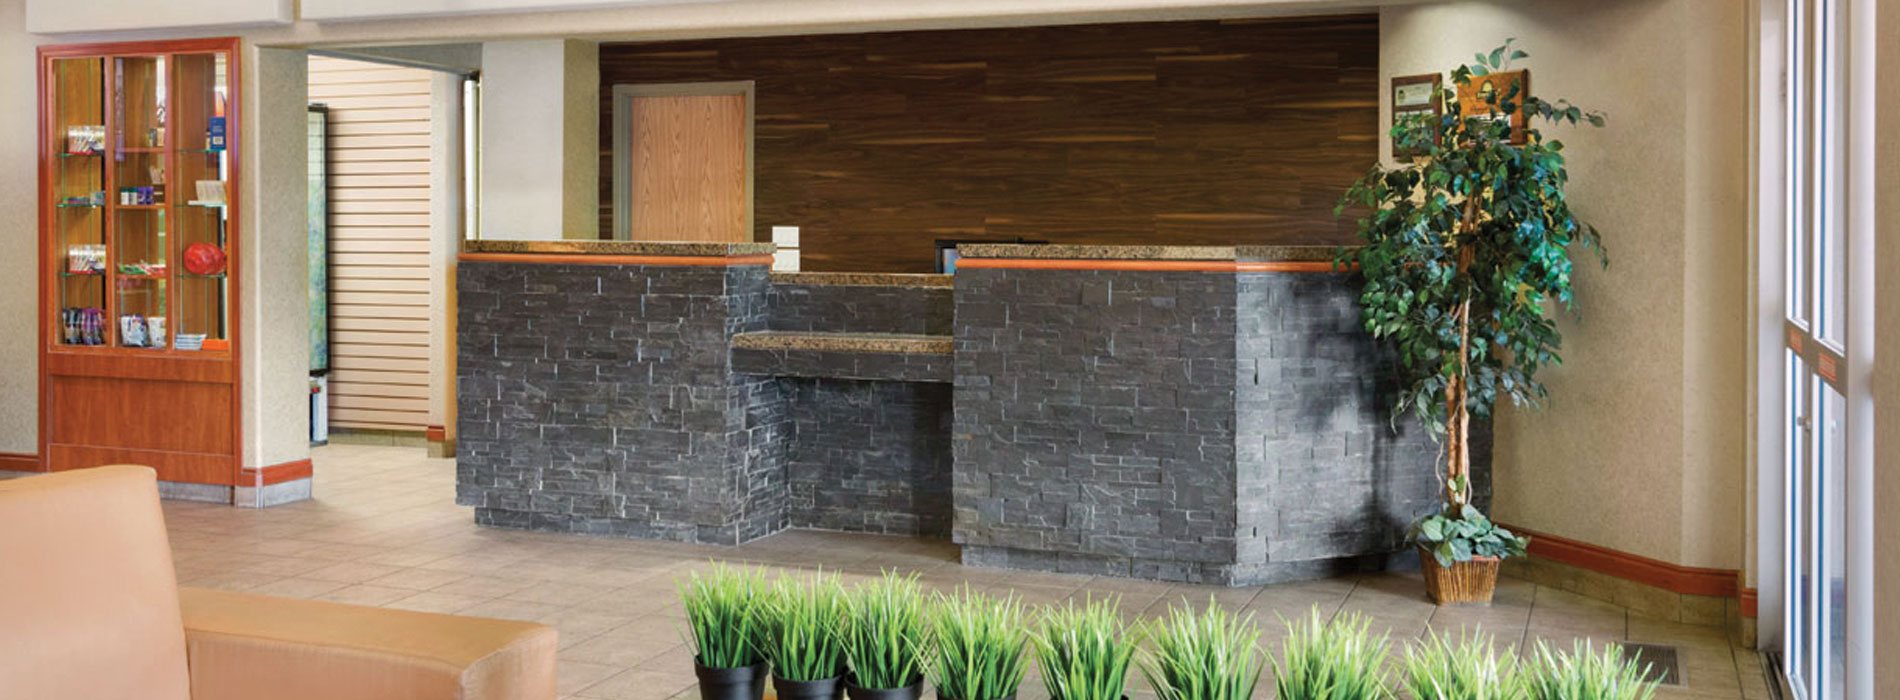 A pigeon gray stone check-in counter with granite top in the lobby of d3h Days Inn Calgary Airport is flanked by a deep green ficus plant and a red ochre brown wood and glass multi-level shelving unit displaying merchandise for sale.  Behind the check-in counter, a brunette brown wood accent wall is contrasted against a sepia wood grain door leading to a back office.